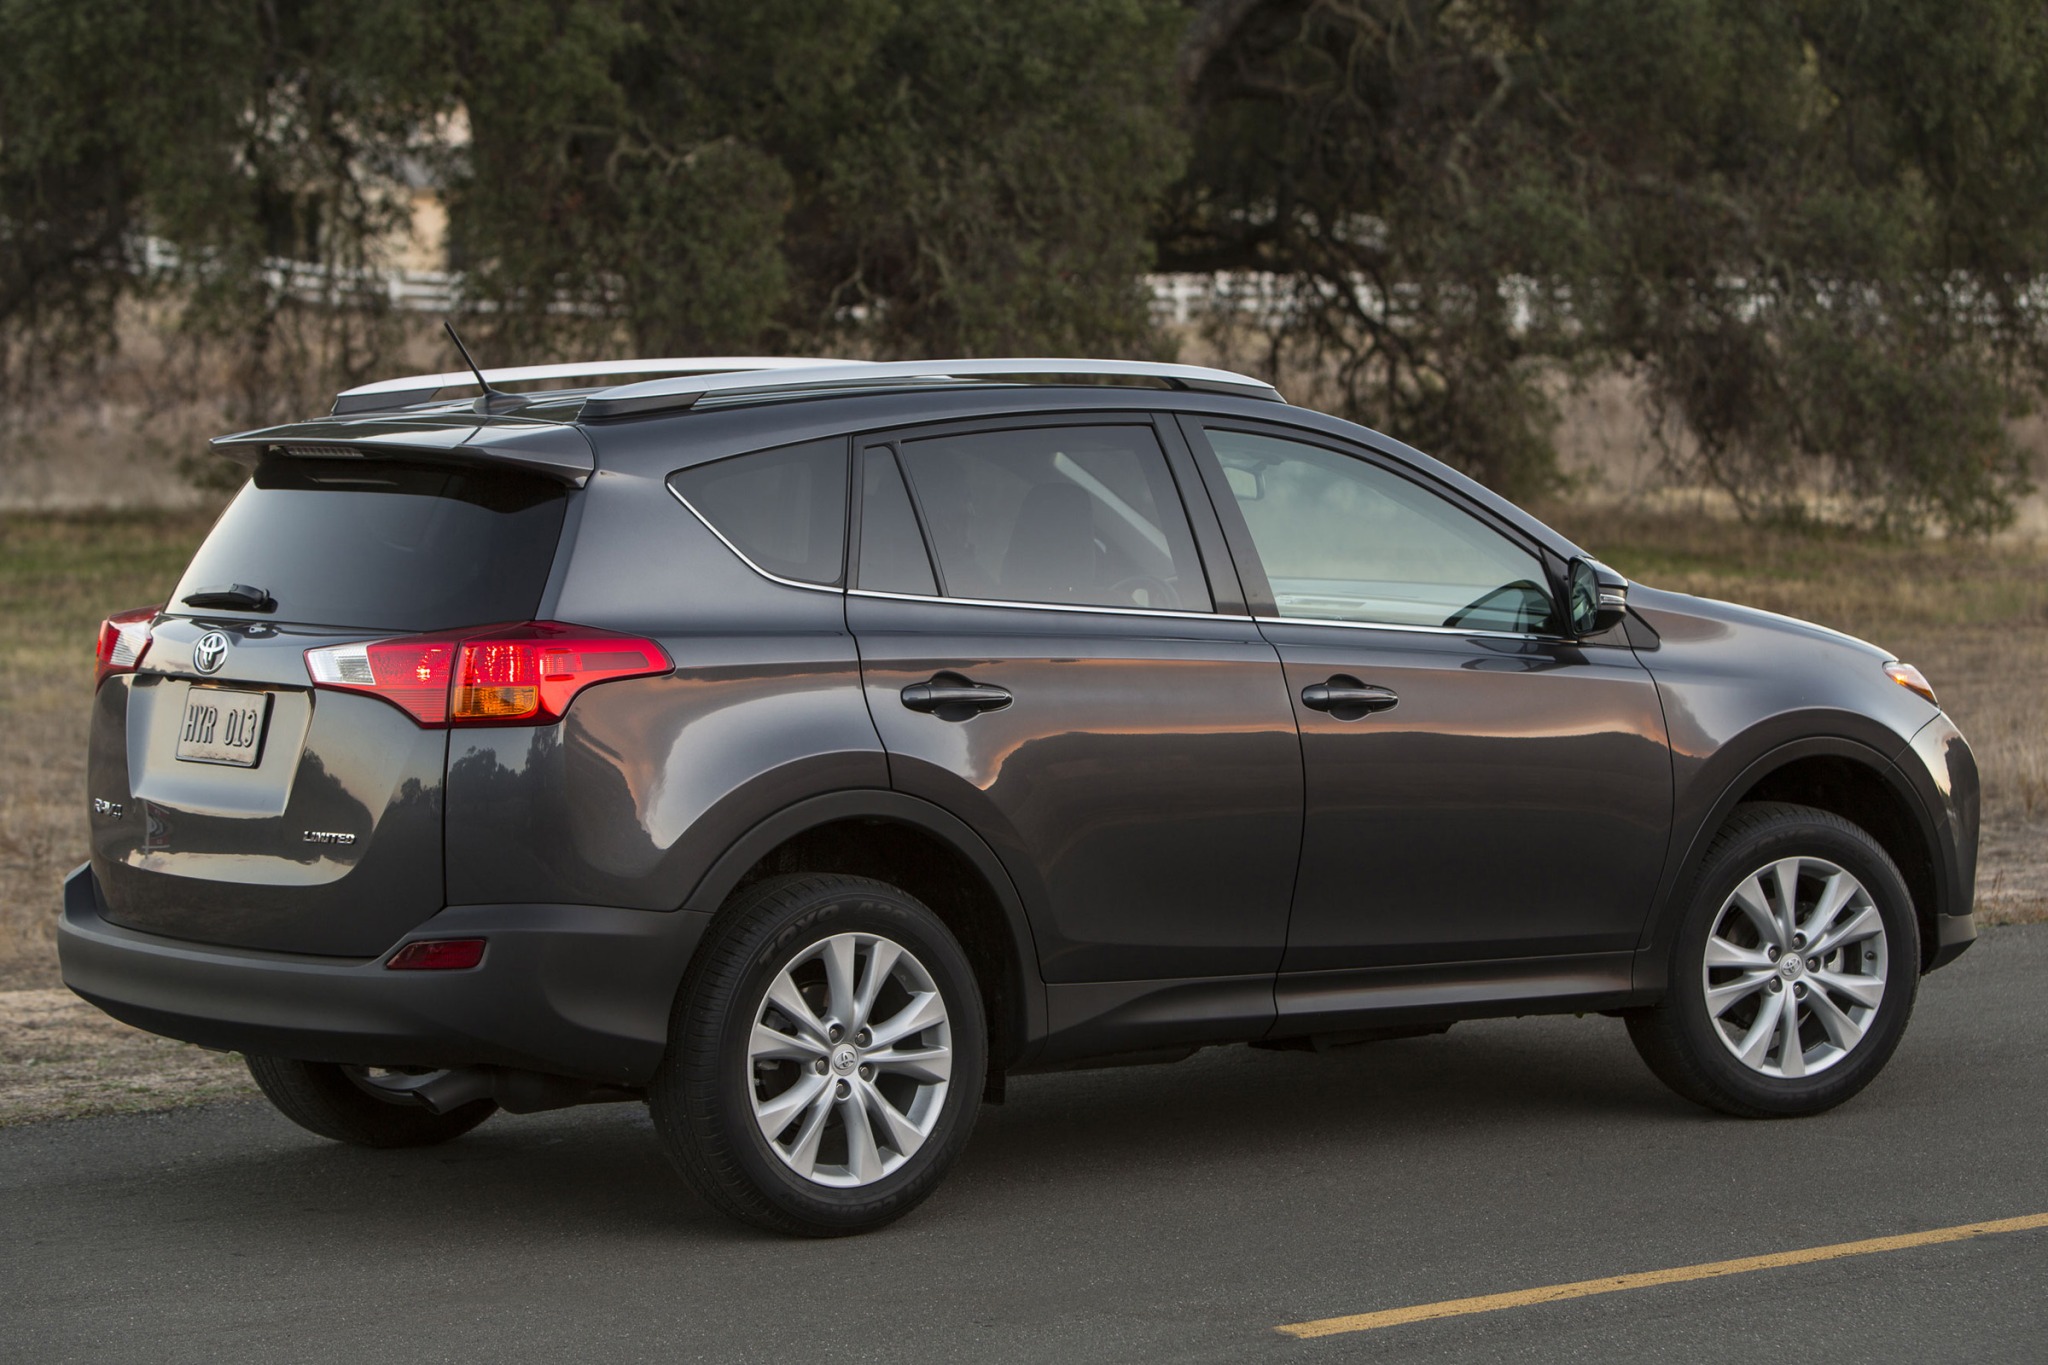 2015 Toyota RAV4 LE FWD VIN Number Search - AutoDetective